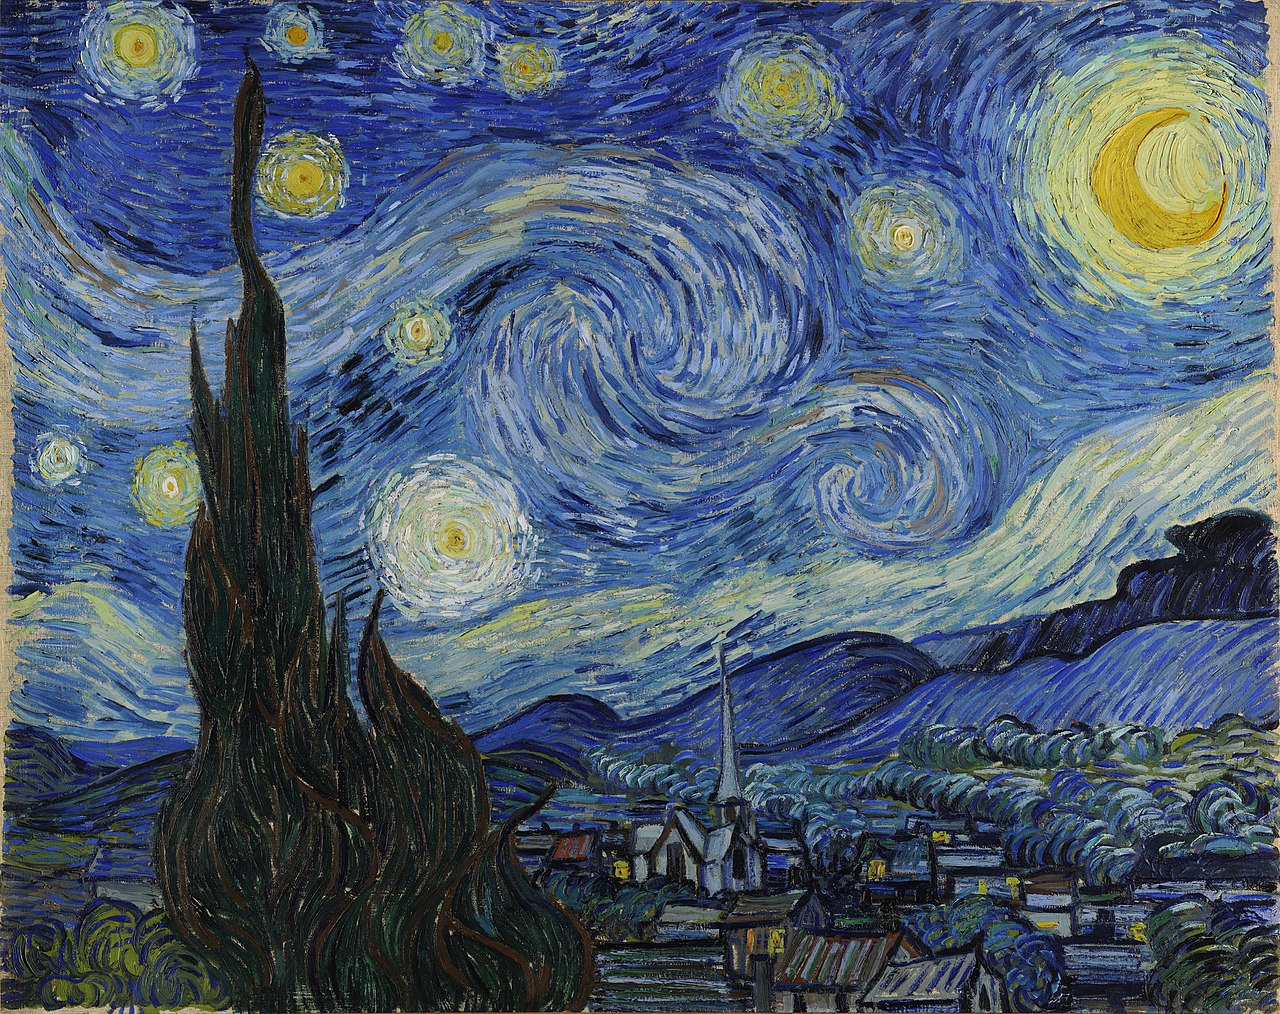 Vincent van Gogh’s Starry Night painting is shown. The painting is a landscape with a brilliantly lit sky with many stars and suns scattered throughout the waves of clouds.